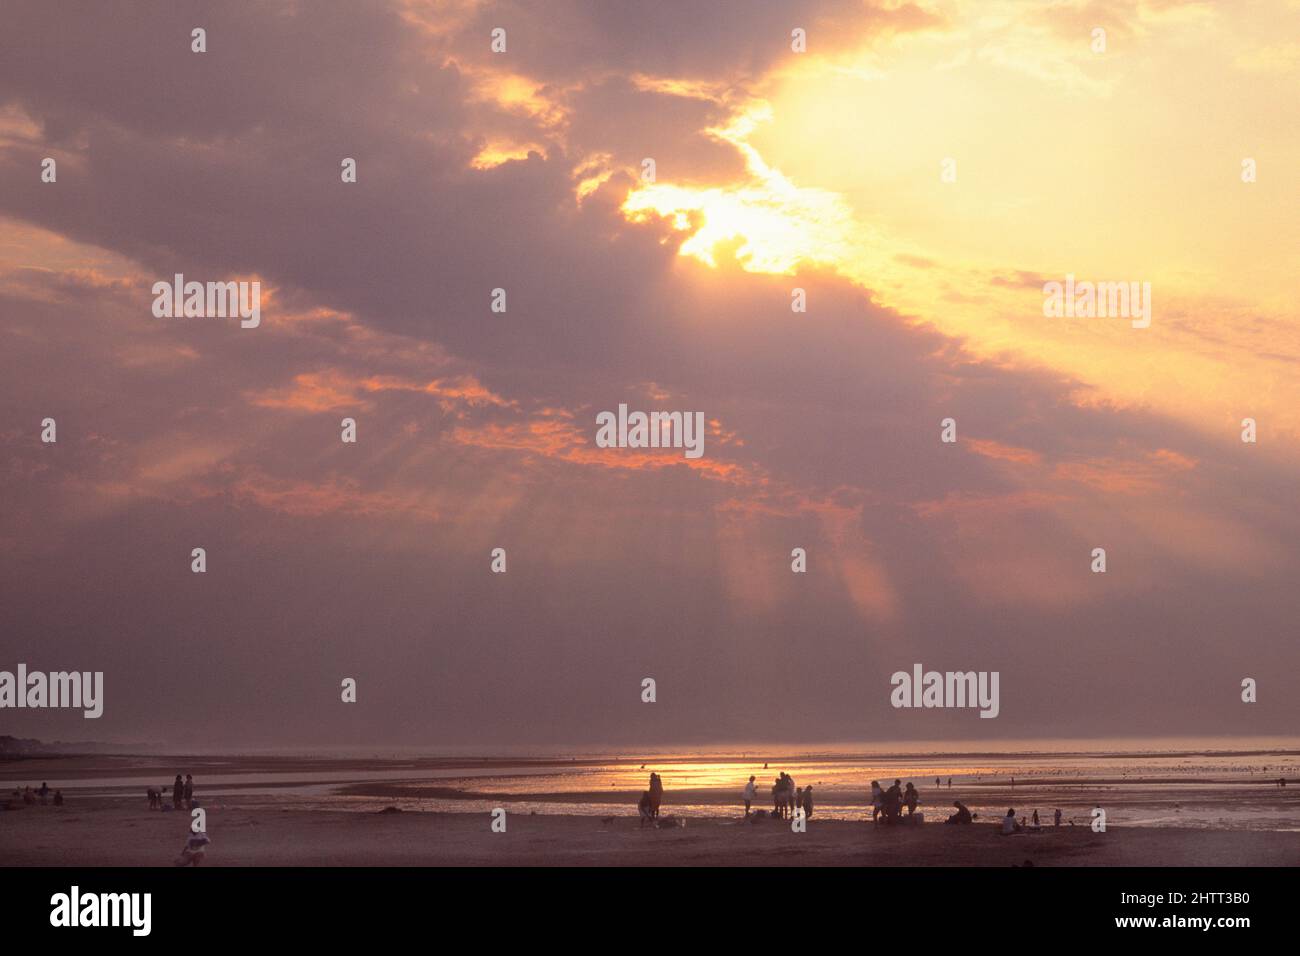 Sunbeams over Cabourg, Normandy coast,.Sunset over the Atlantic Ocean. Sun behind dark clouds. Silhouettes of people on beach. Cote Fleurie, France Stock Photo